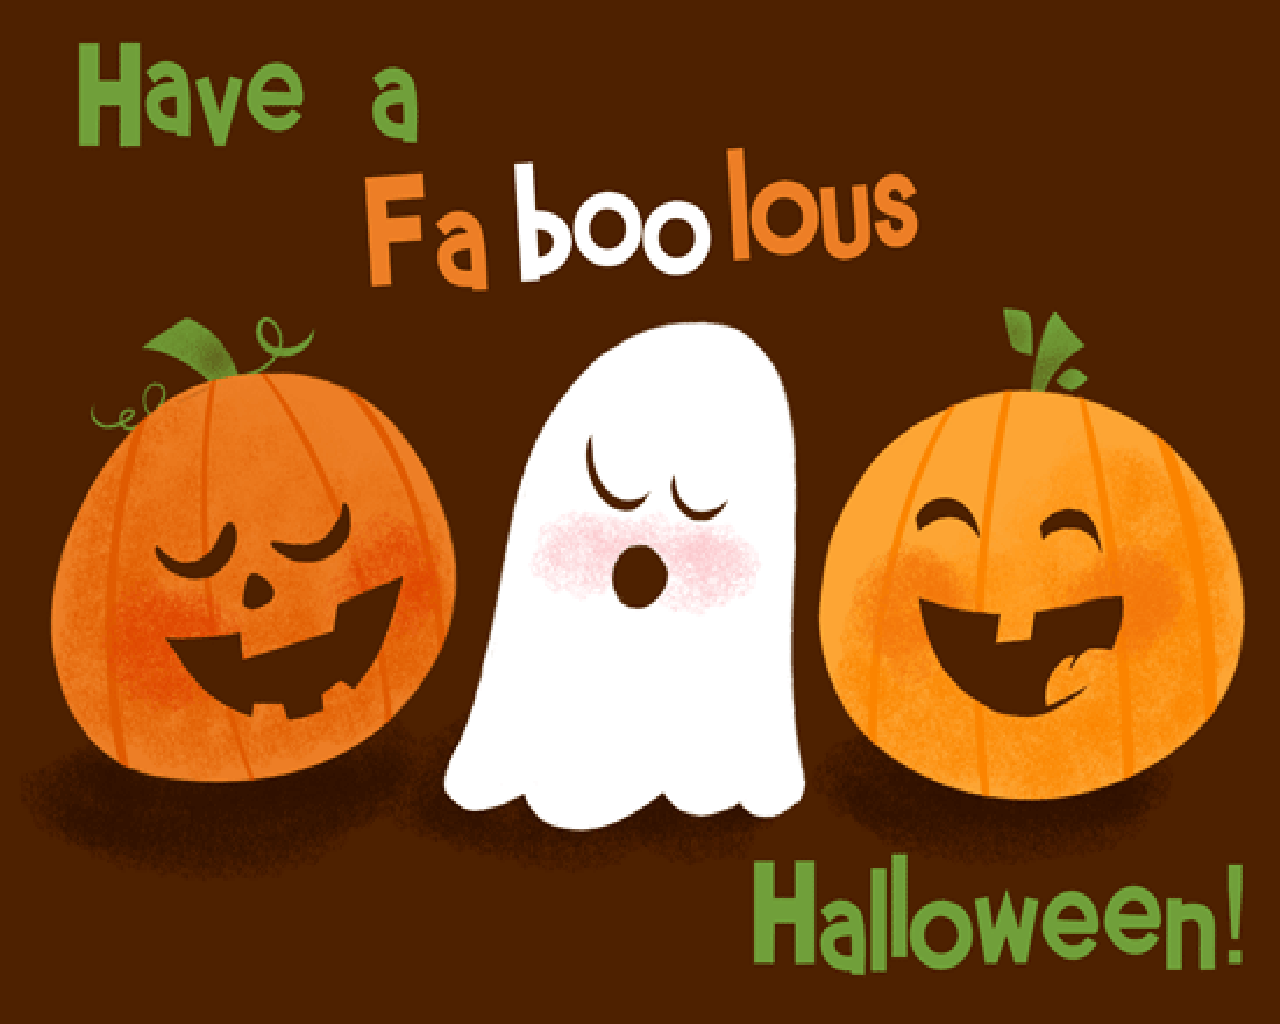 Funny Halloween Backgrounds - Wallpaper Cave